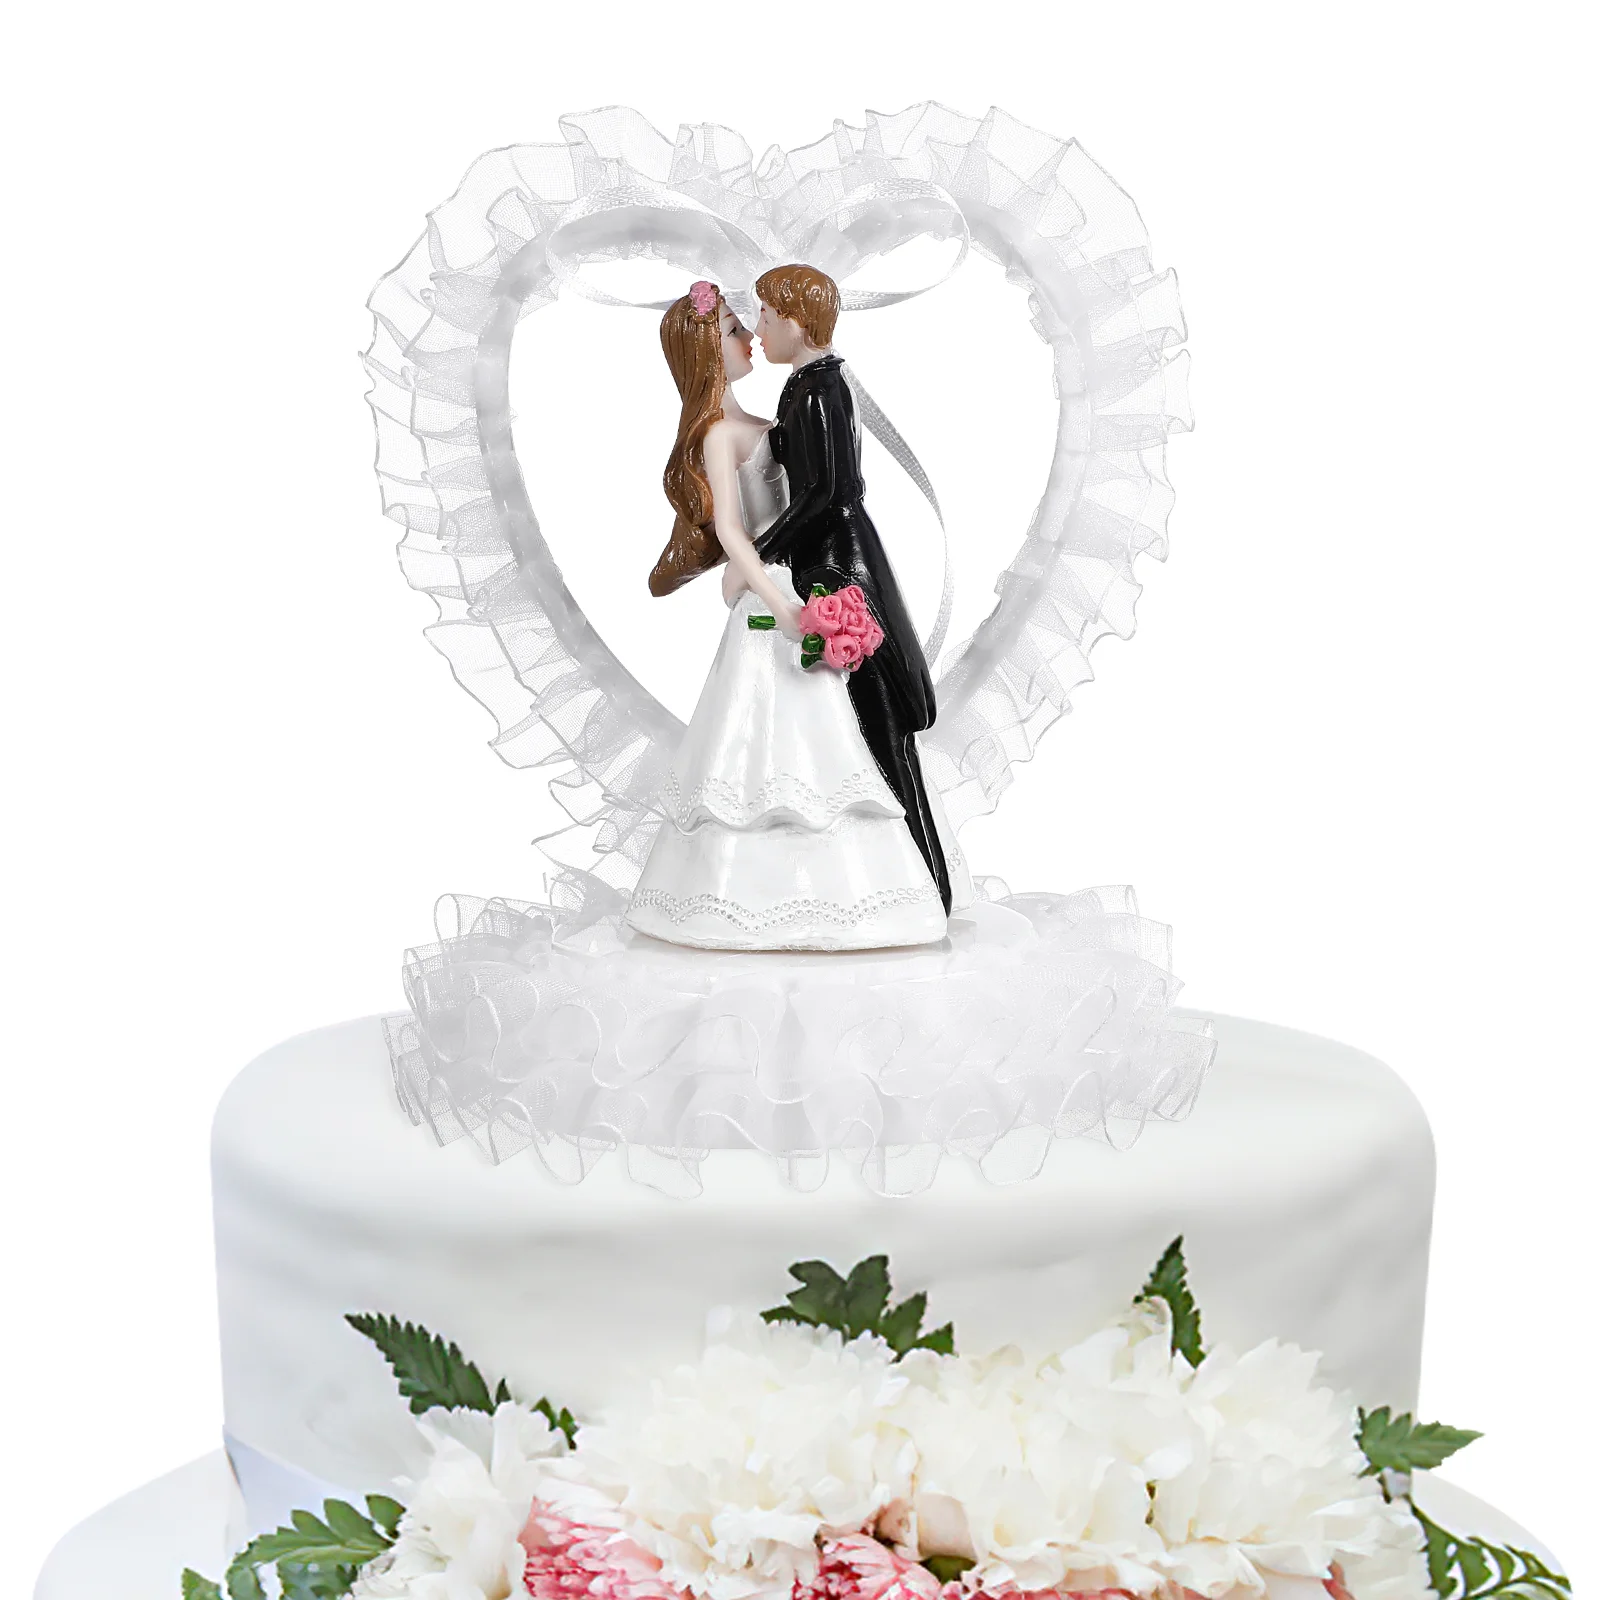 Cake Adornment Wedding Bride Gifts Para Pastel Groom Couple Ornaments Topper Statue Figurines